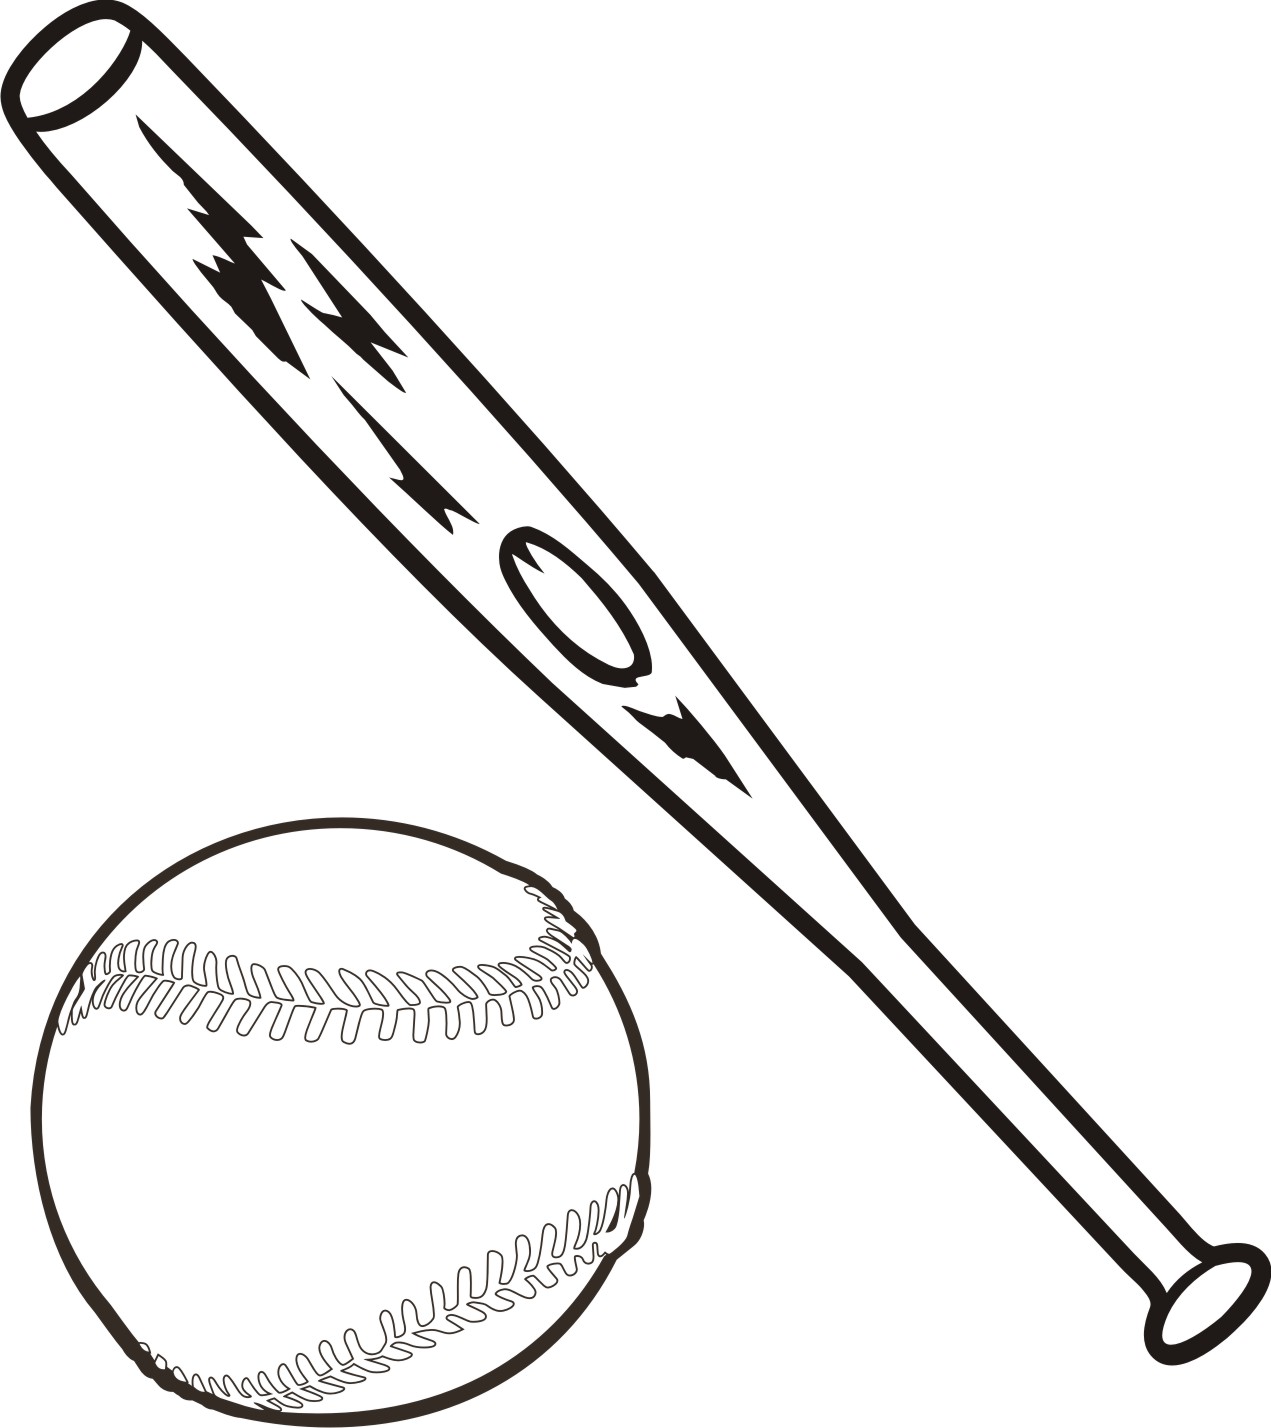 Featured image of post Softball Bat Drawing Easy Softball032 fotosearch stock photography and stock footage helps you find the perfect photo or footage fast